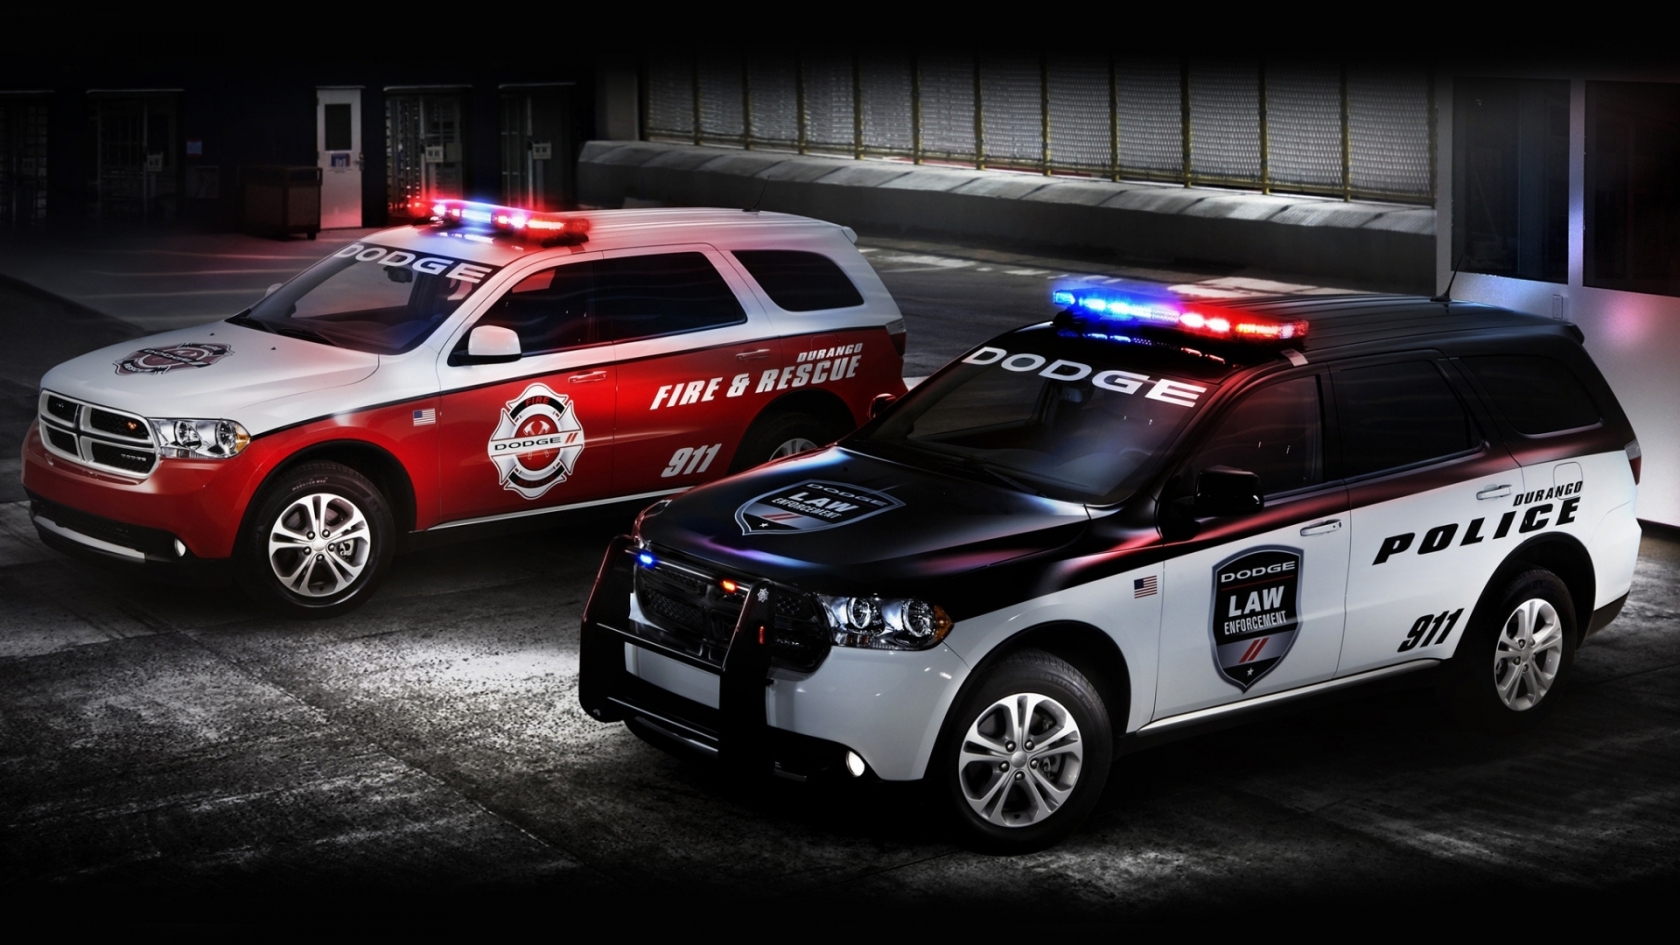 Dodge Police and Fire Cars for 1680 x 945 HDTV resolution